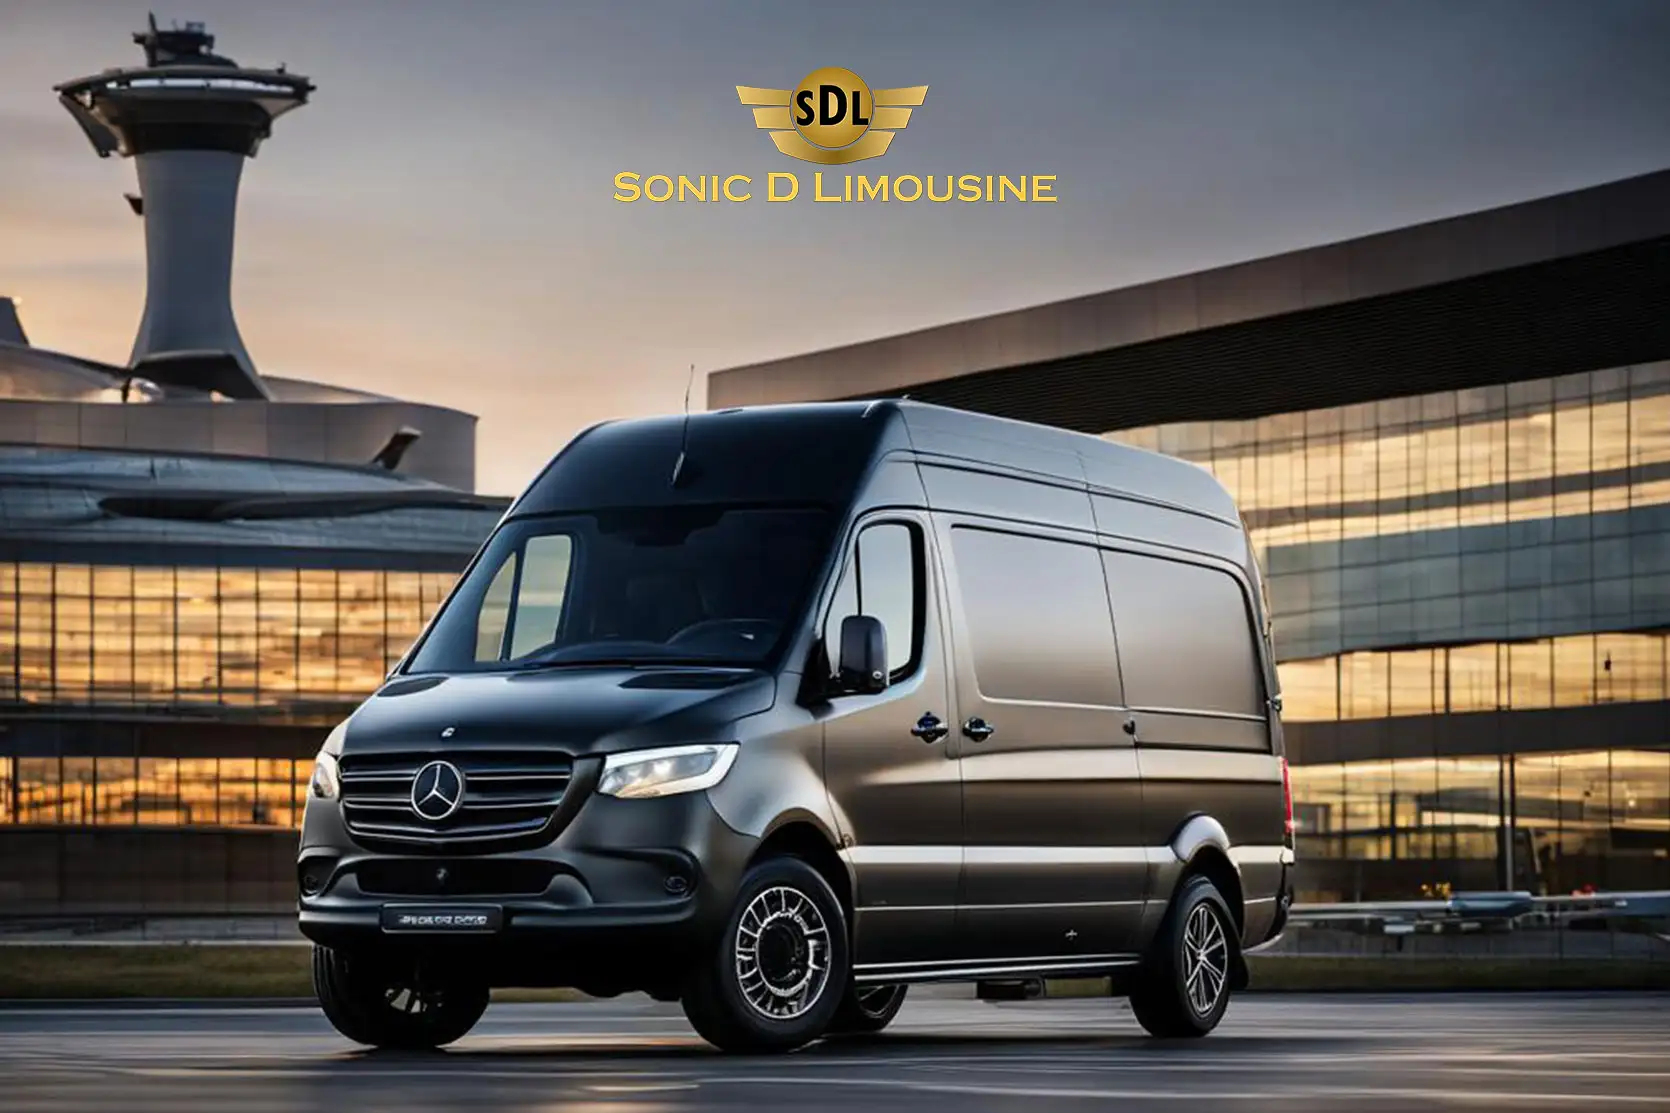 Sonic D Limousine is the premier transportation provider in Best Airport Shuttle Service